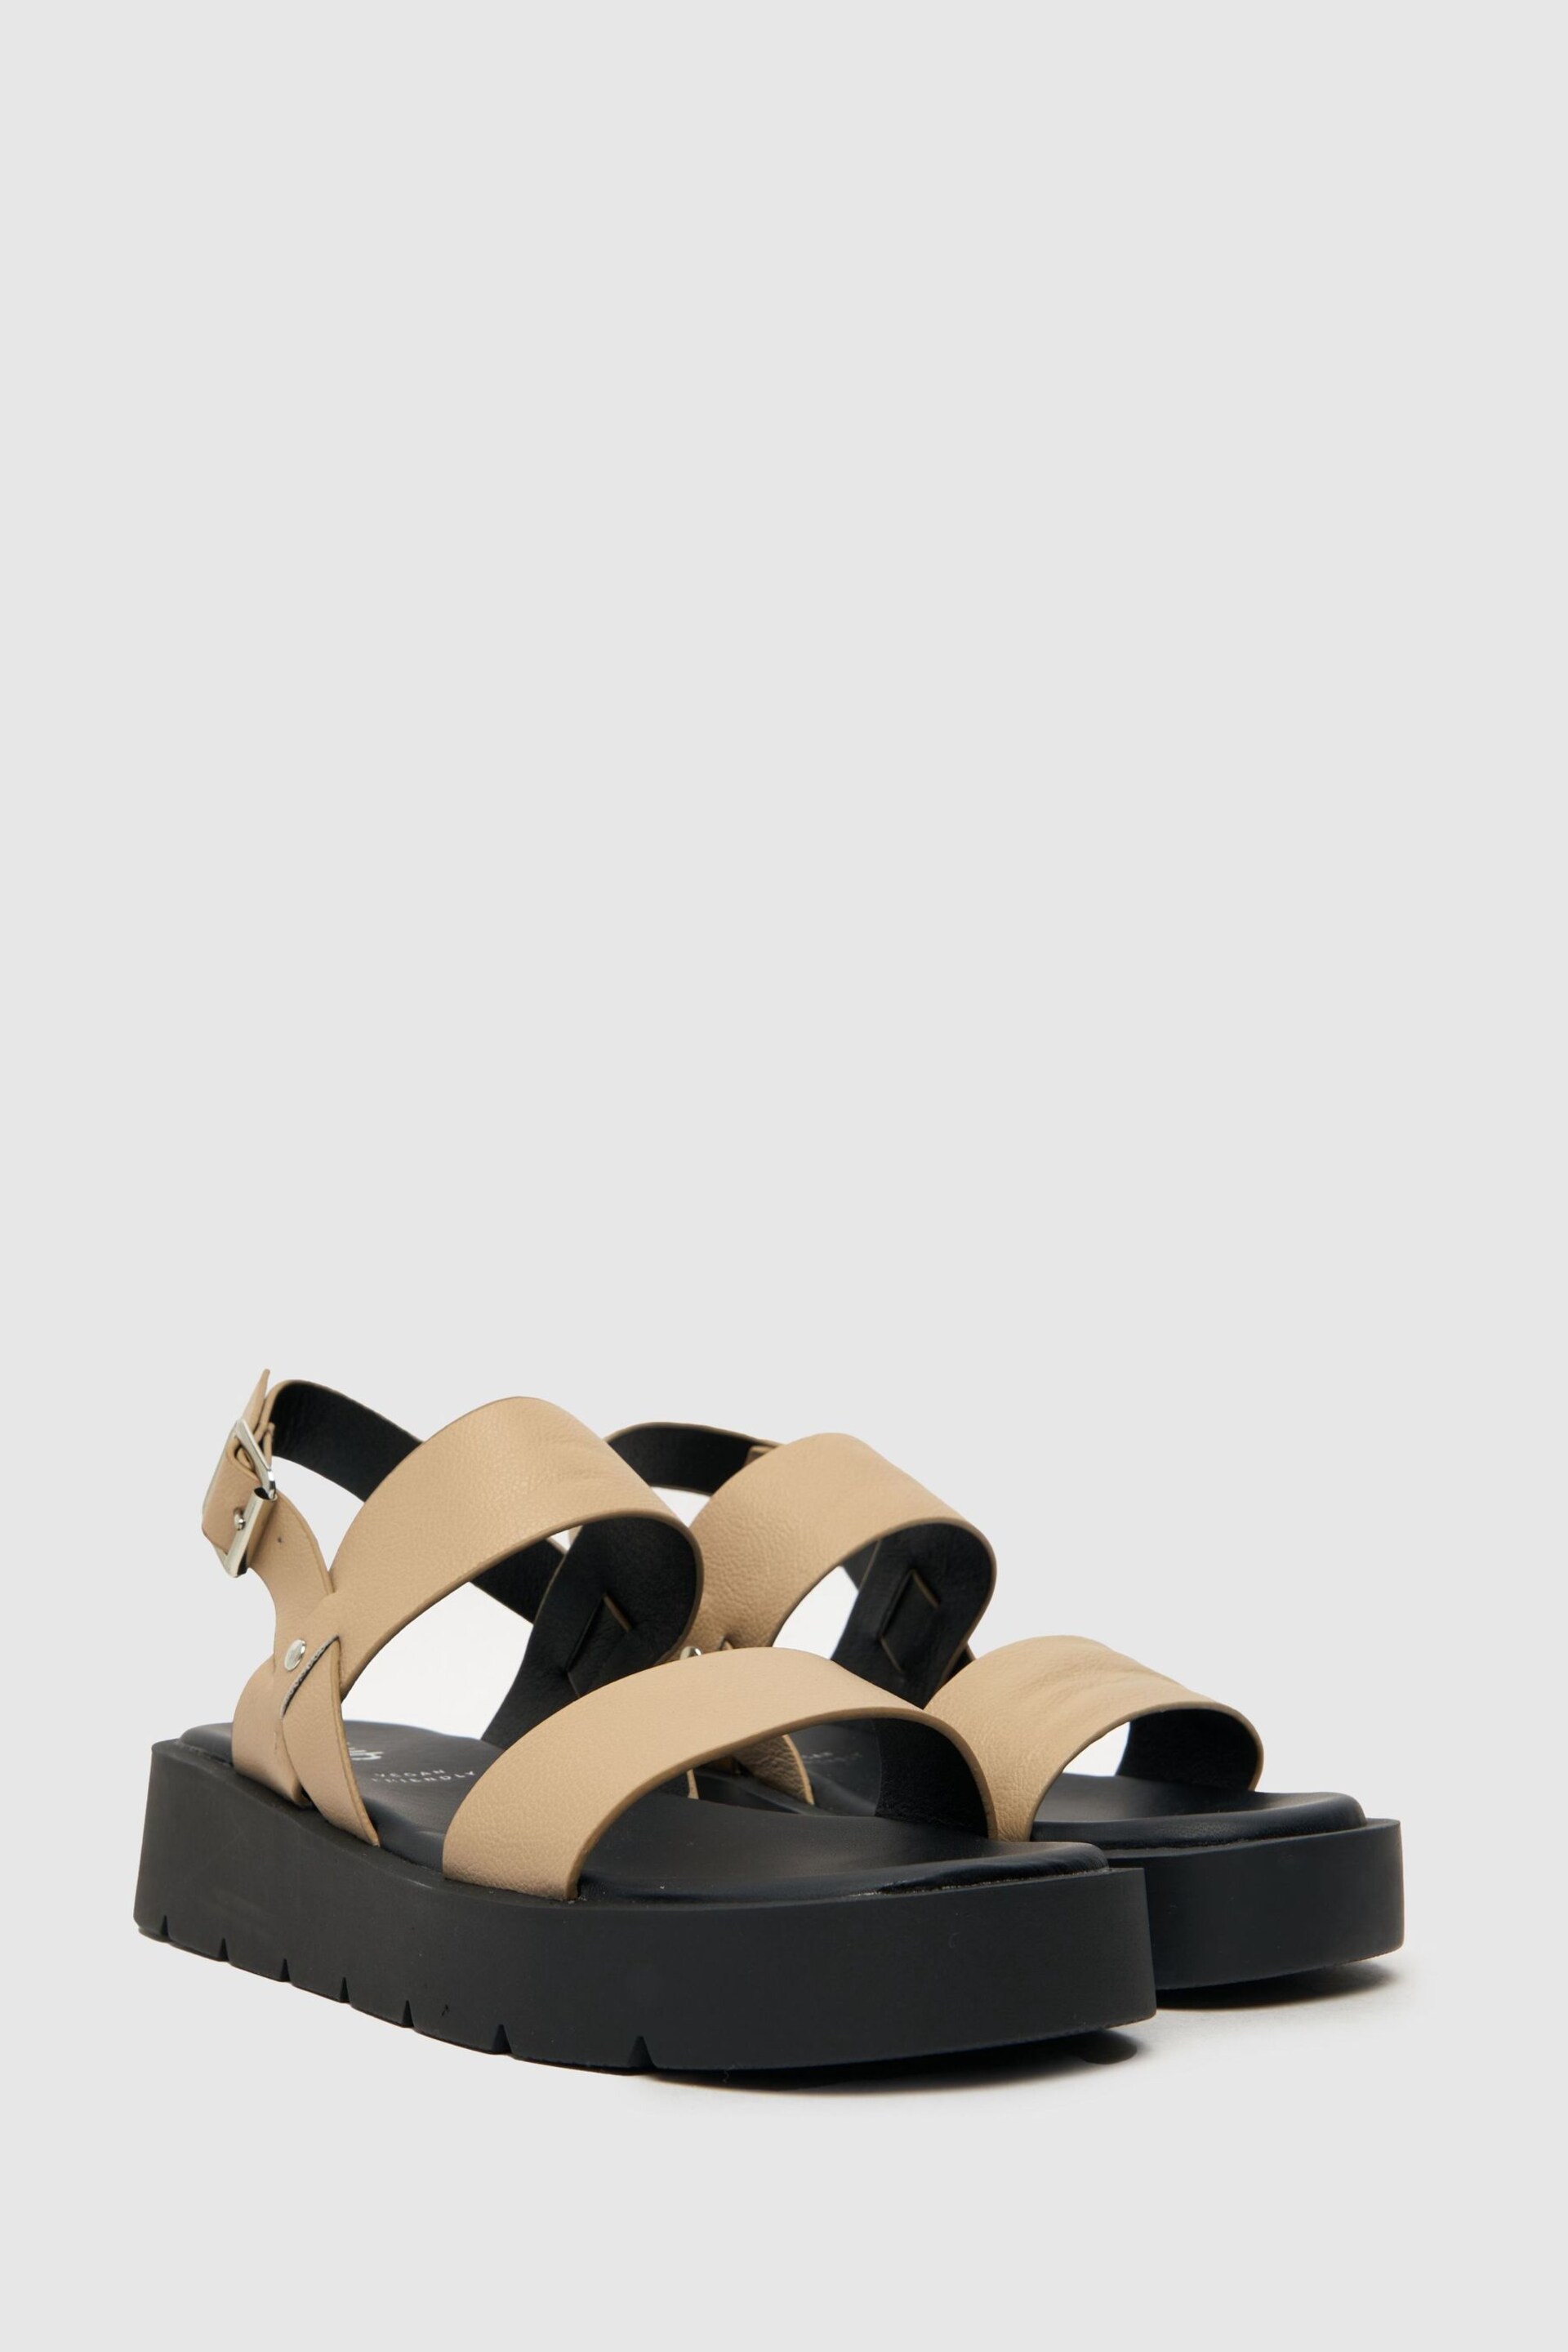 Schuh Tayla Chunky Sandals - Image 1 of 4